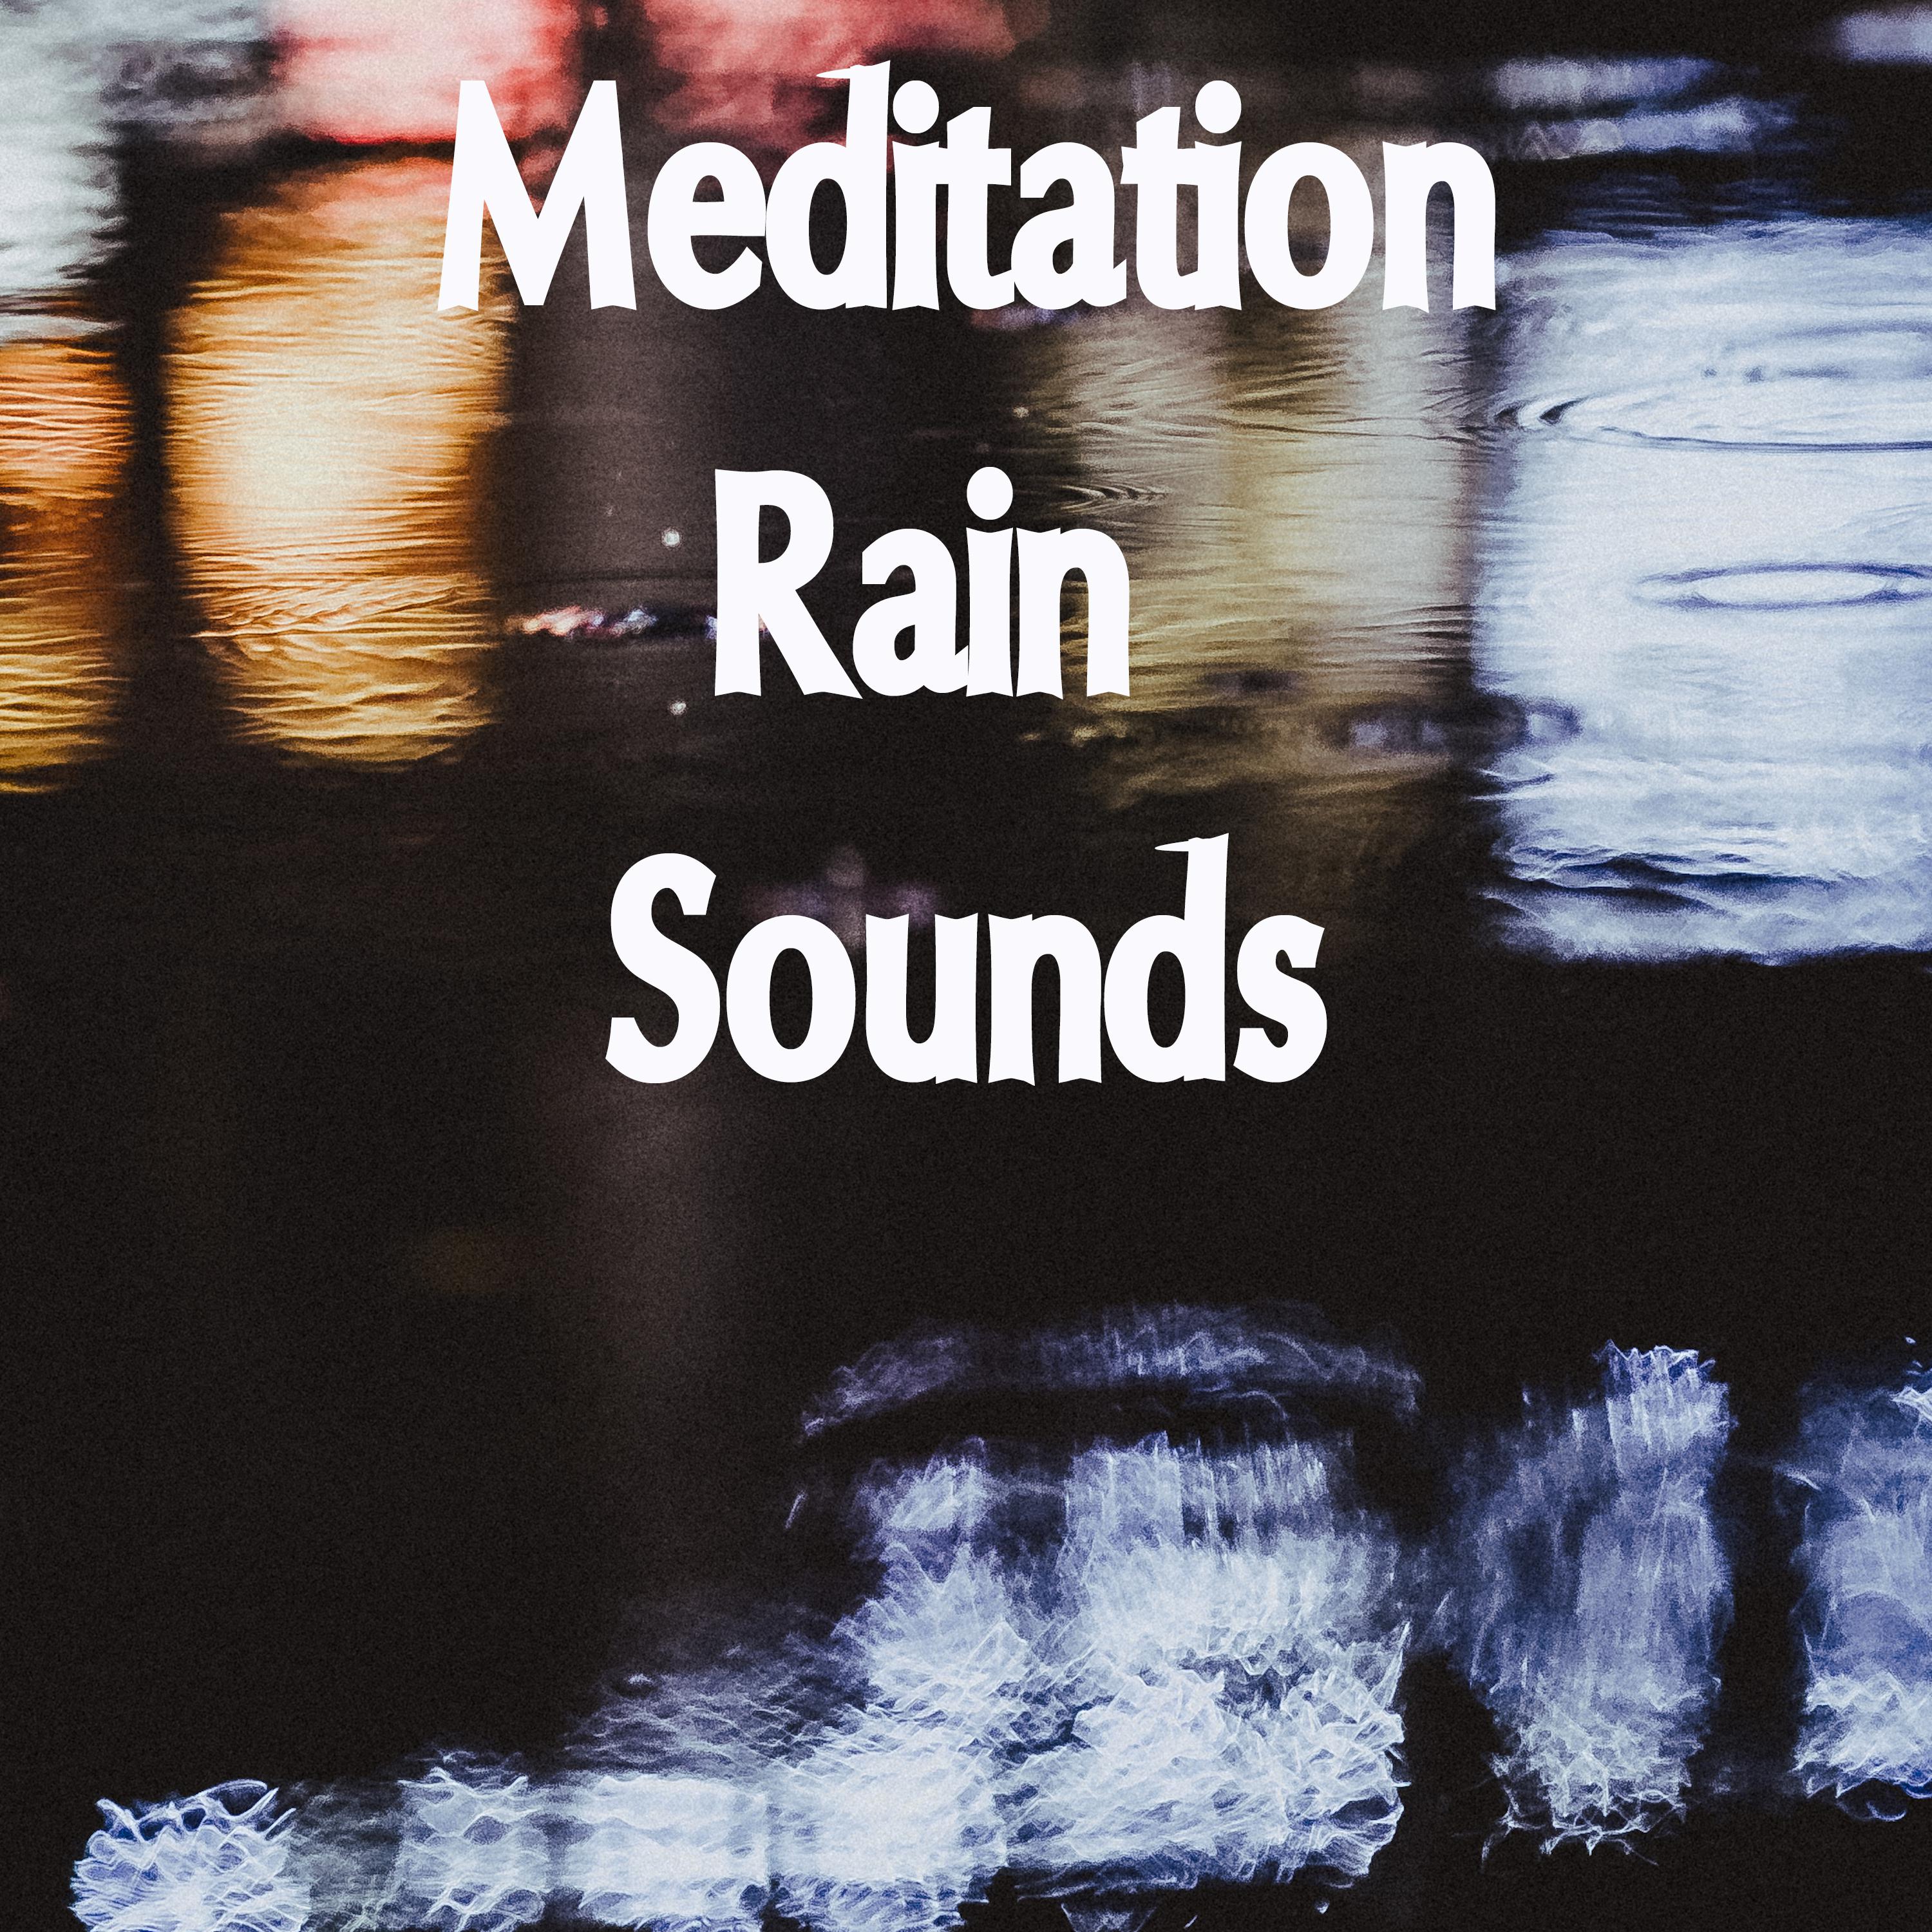 14 Meditation Rain and Relaxation Sounds -Sounds for Deep and Restful Sleep